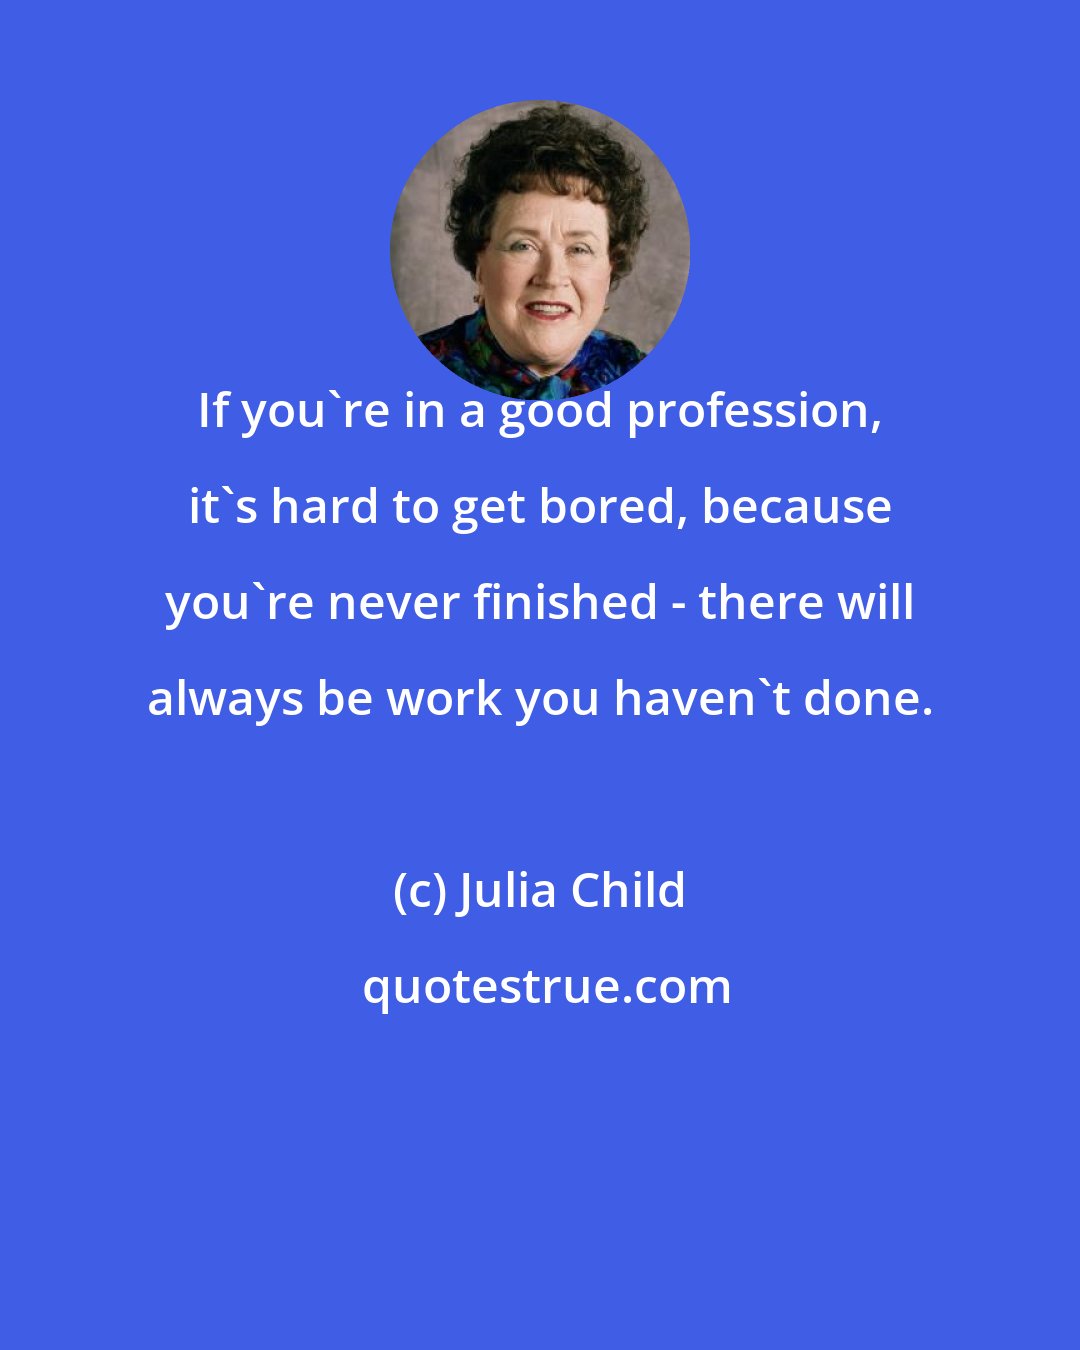 Julia Child: If you're in a good profession, it's hard to get bored, because you're never finished - there will always be work you haven't done.